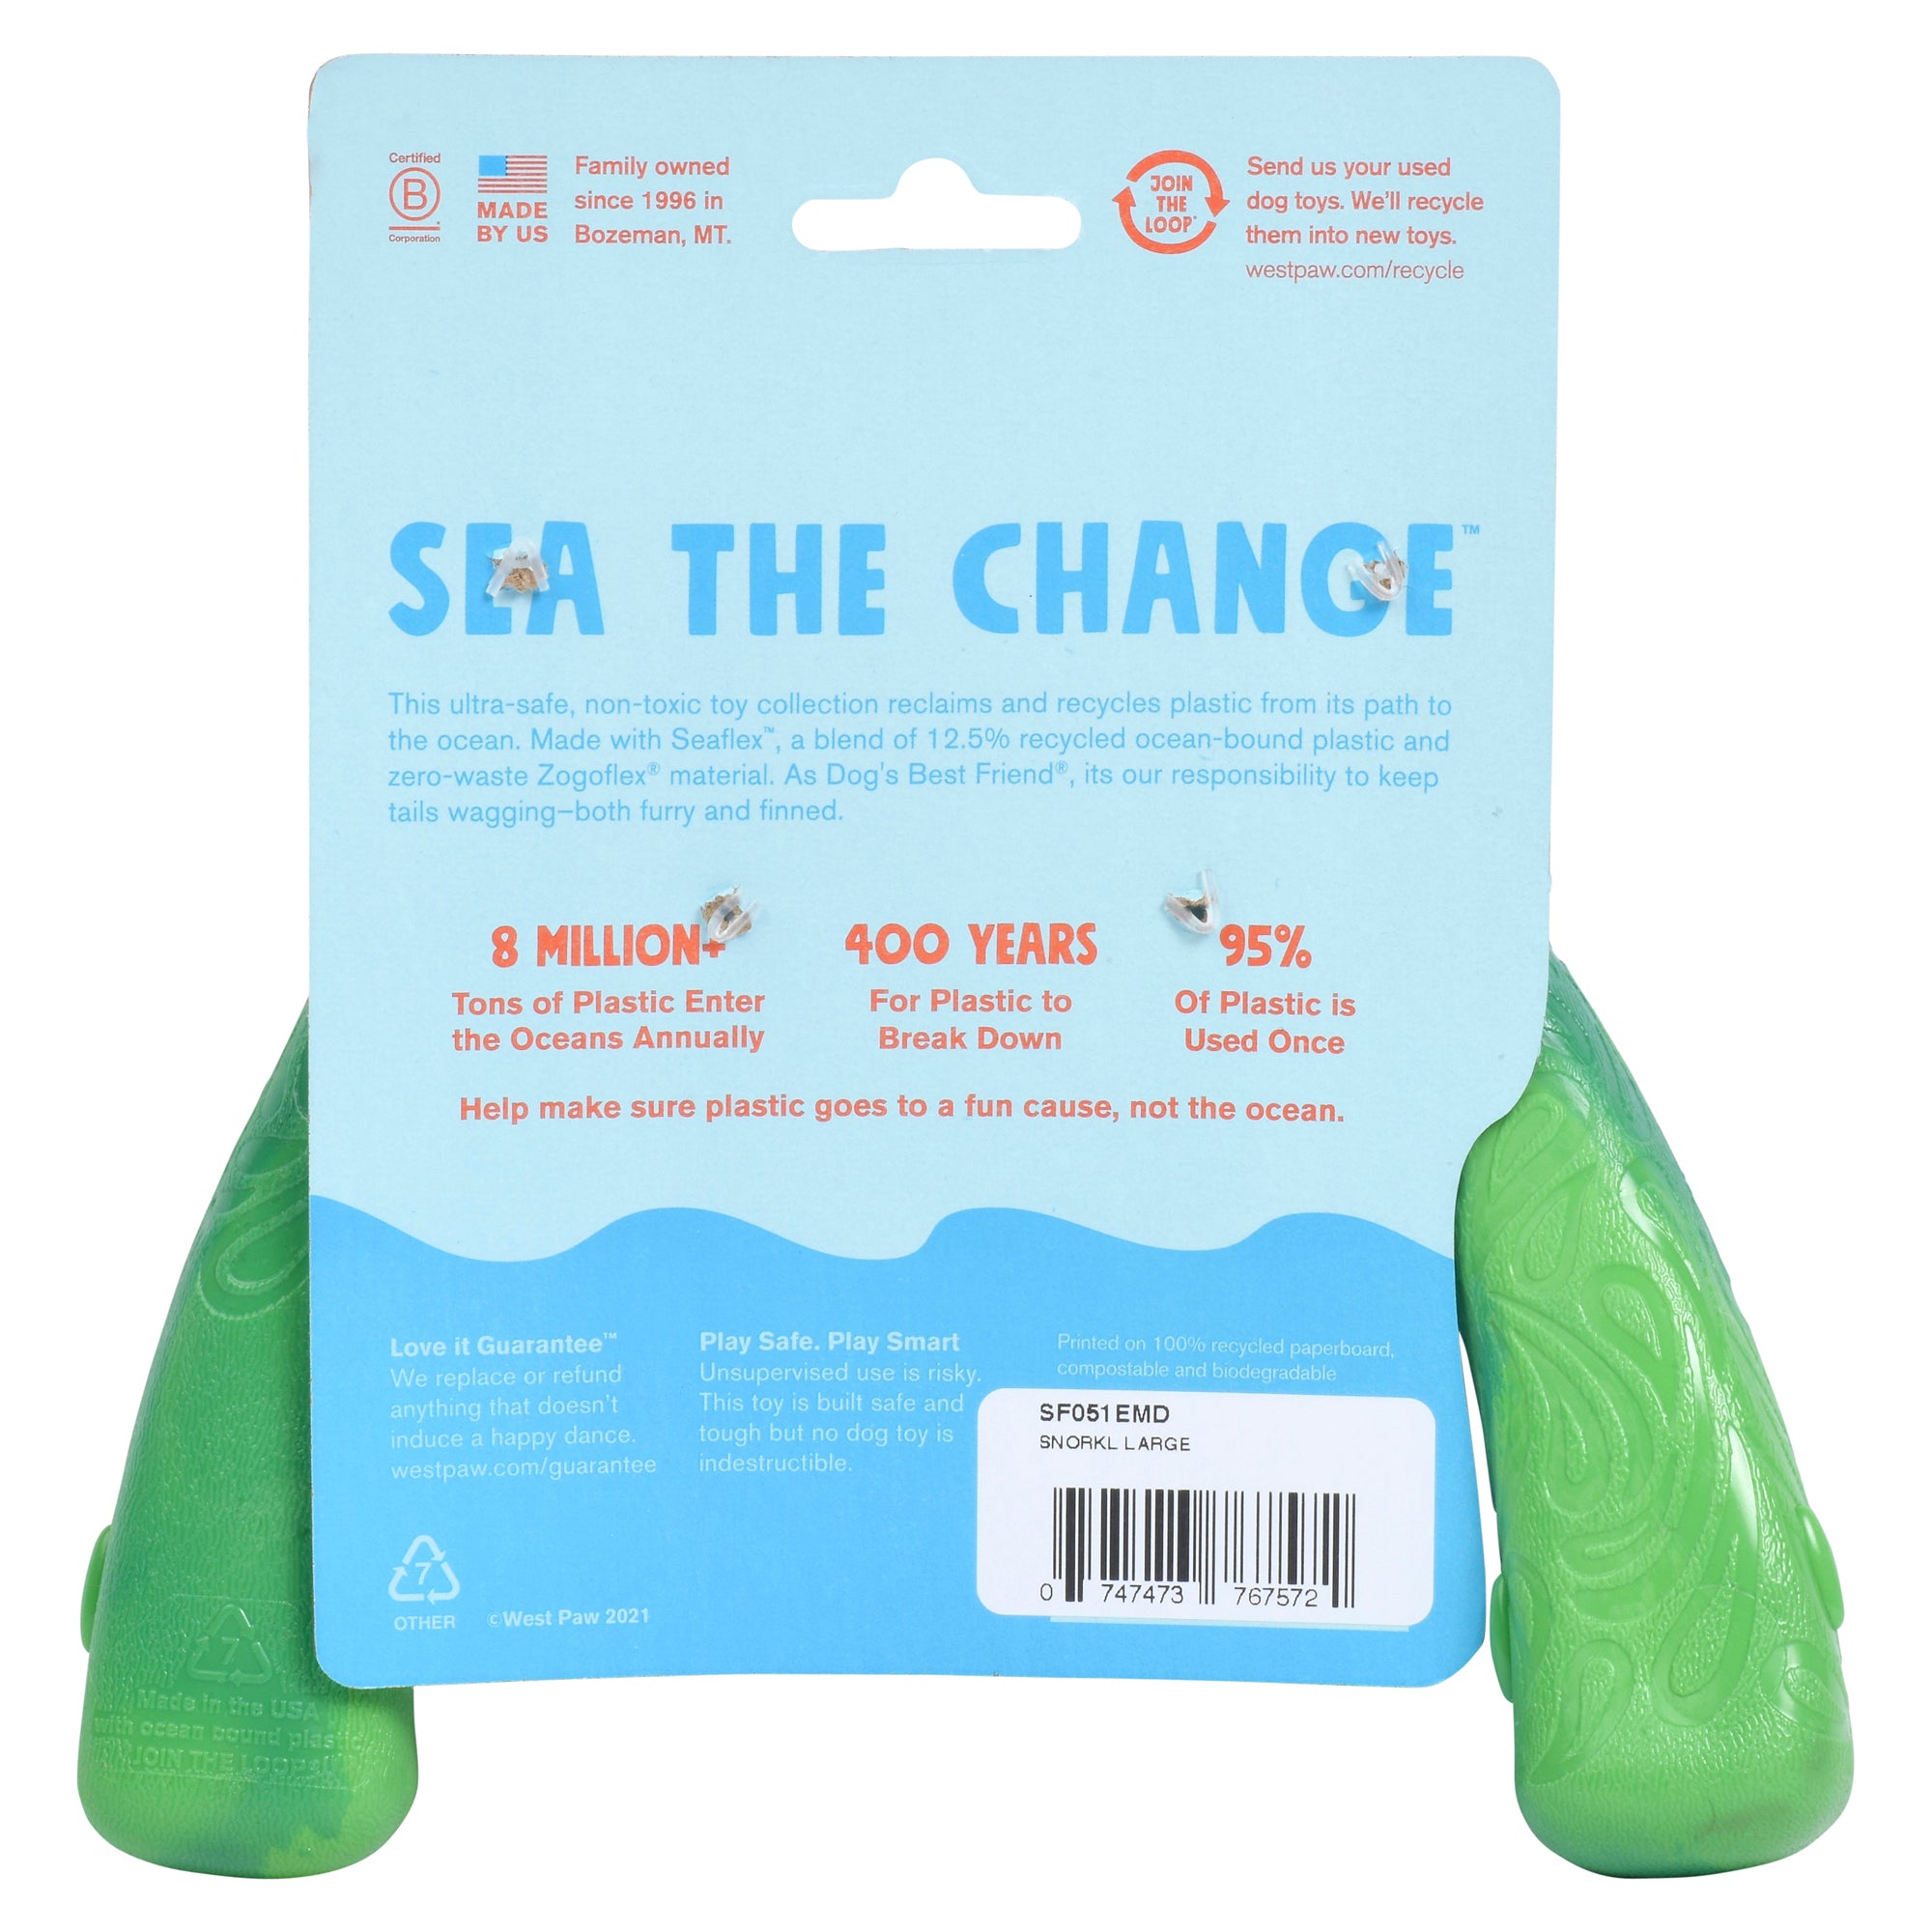 Snorkl is a durable and fun shaped toy that is designed for dogs who love bones, boomerangs, and games of tug. Perfect for interactive play between dogs or bond forming play between dogs and their humans. Toy floats in water and has an ocean-inspired texture.